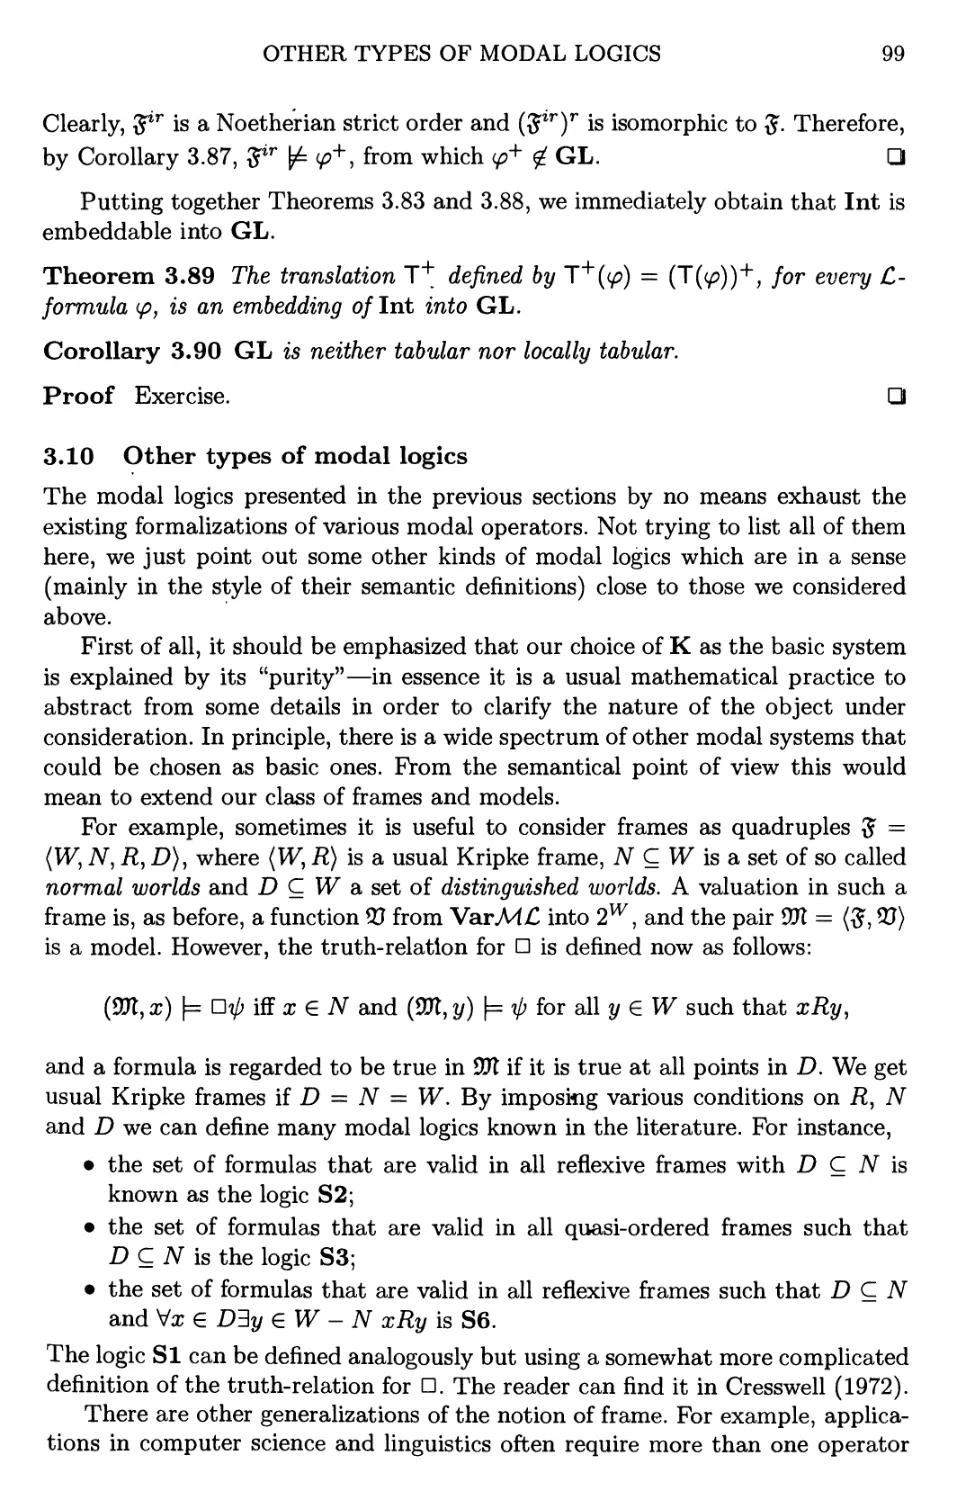 3.10 Other types of modal logics